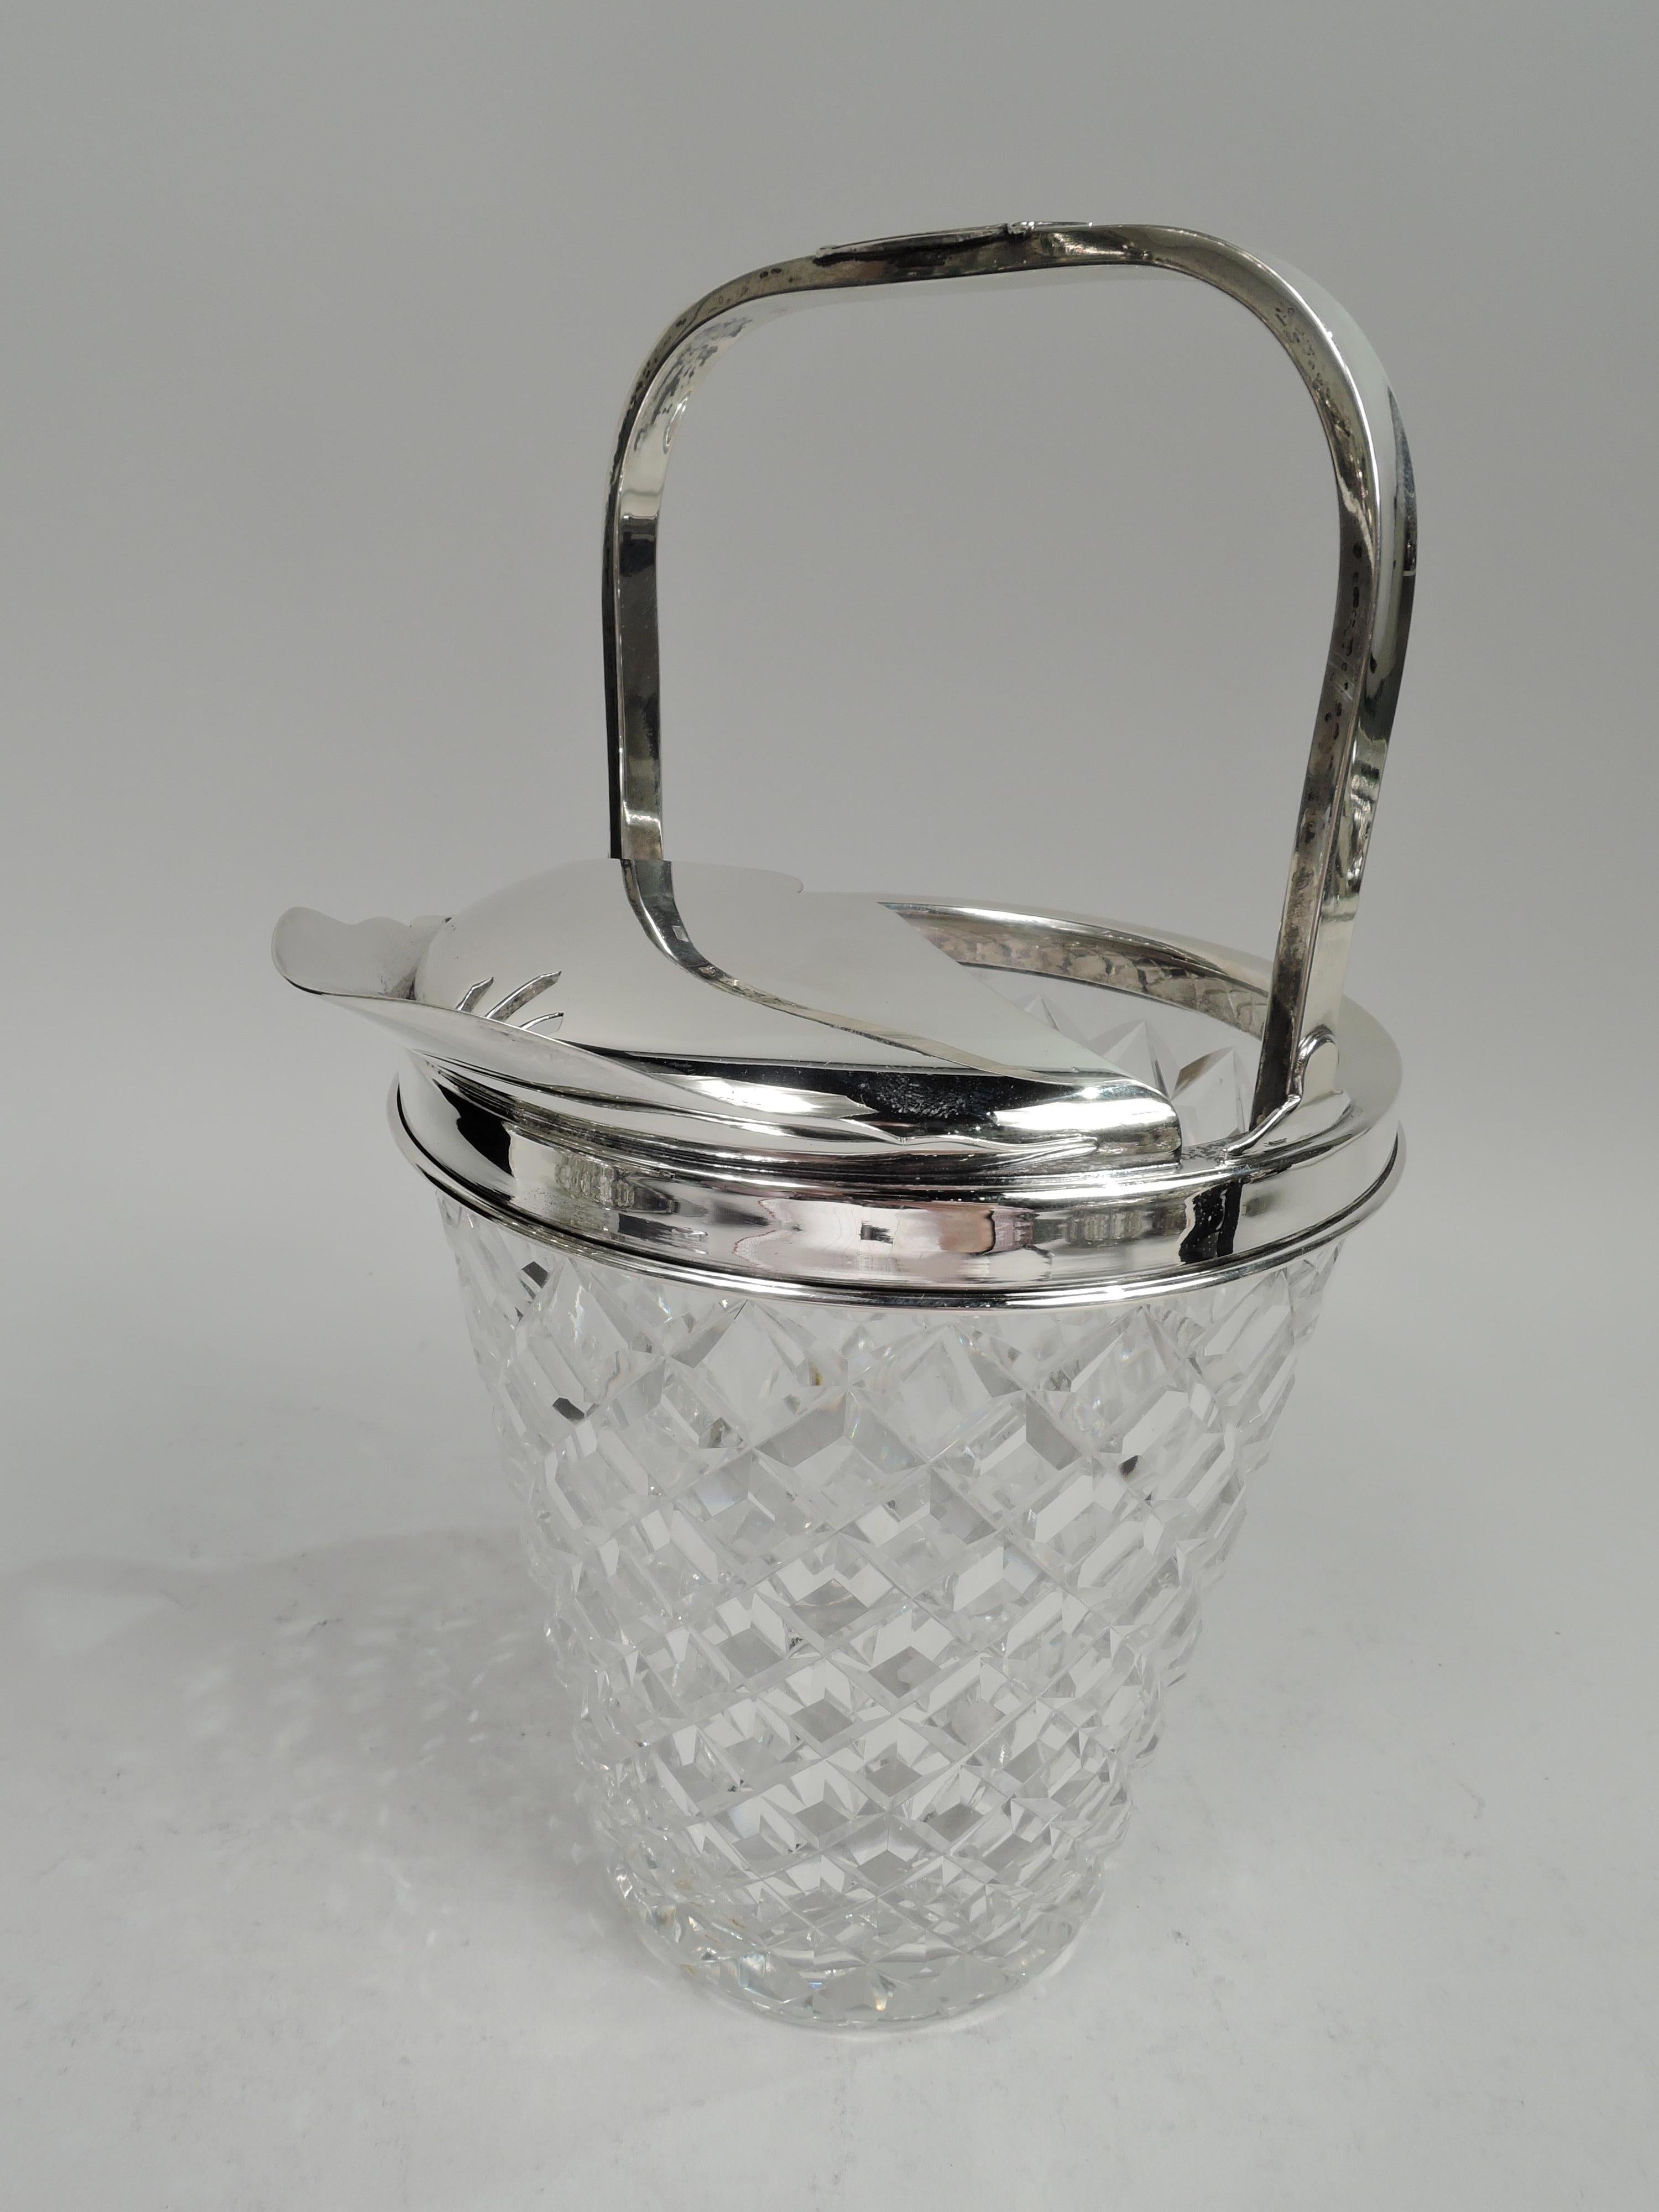 Mid-Century Modern sterling silver and glass ice bucket. Straight and tapering glass bowl with allover raised and faceted diaper pattern. Sterling silver collar with scrolled and pierced guard and scrolled u-form spout. Fixed scroll-mounted bracket